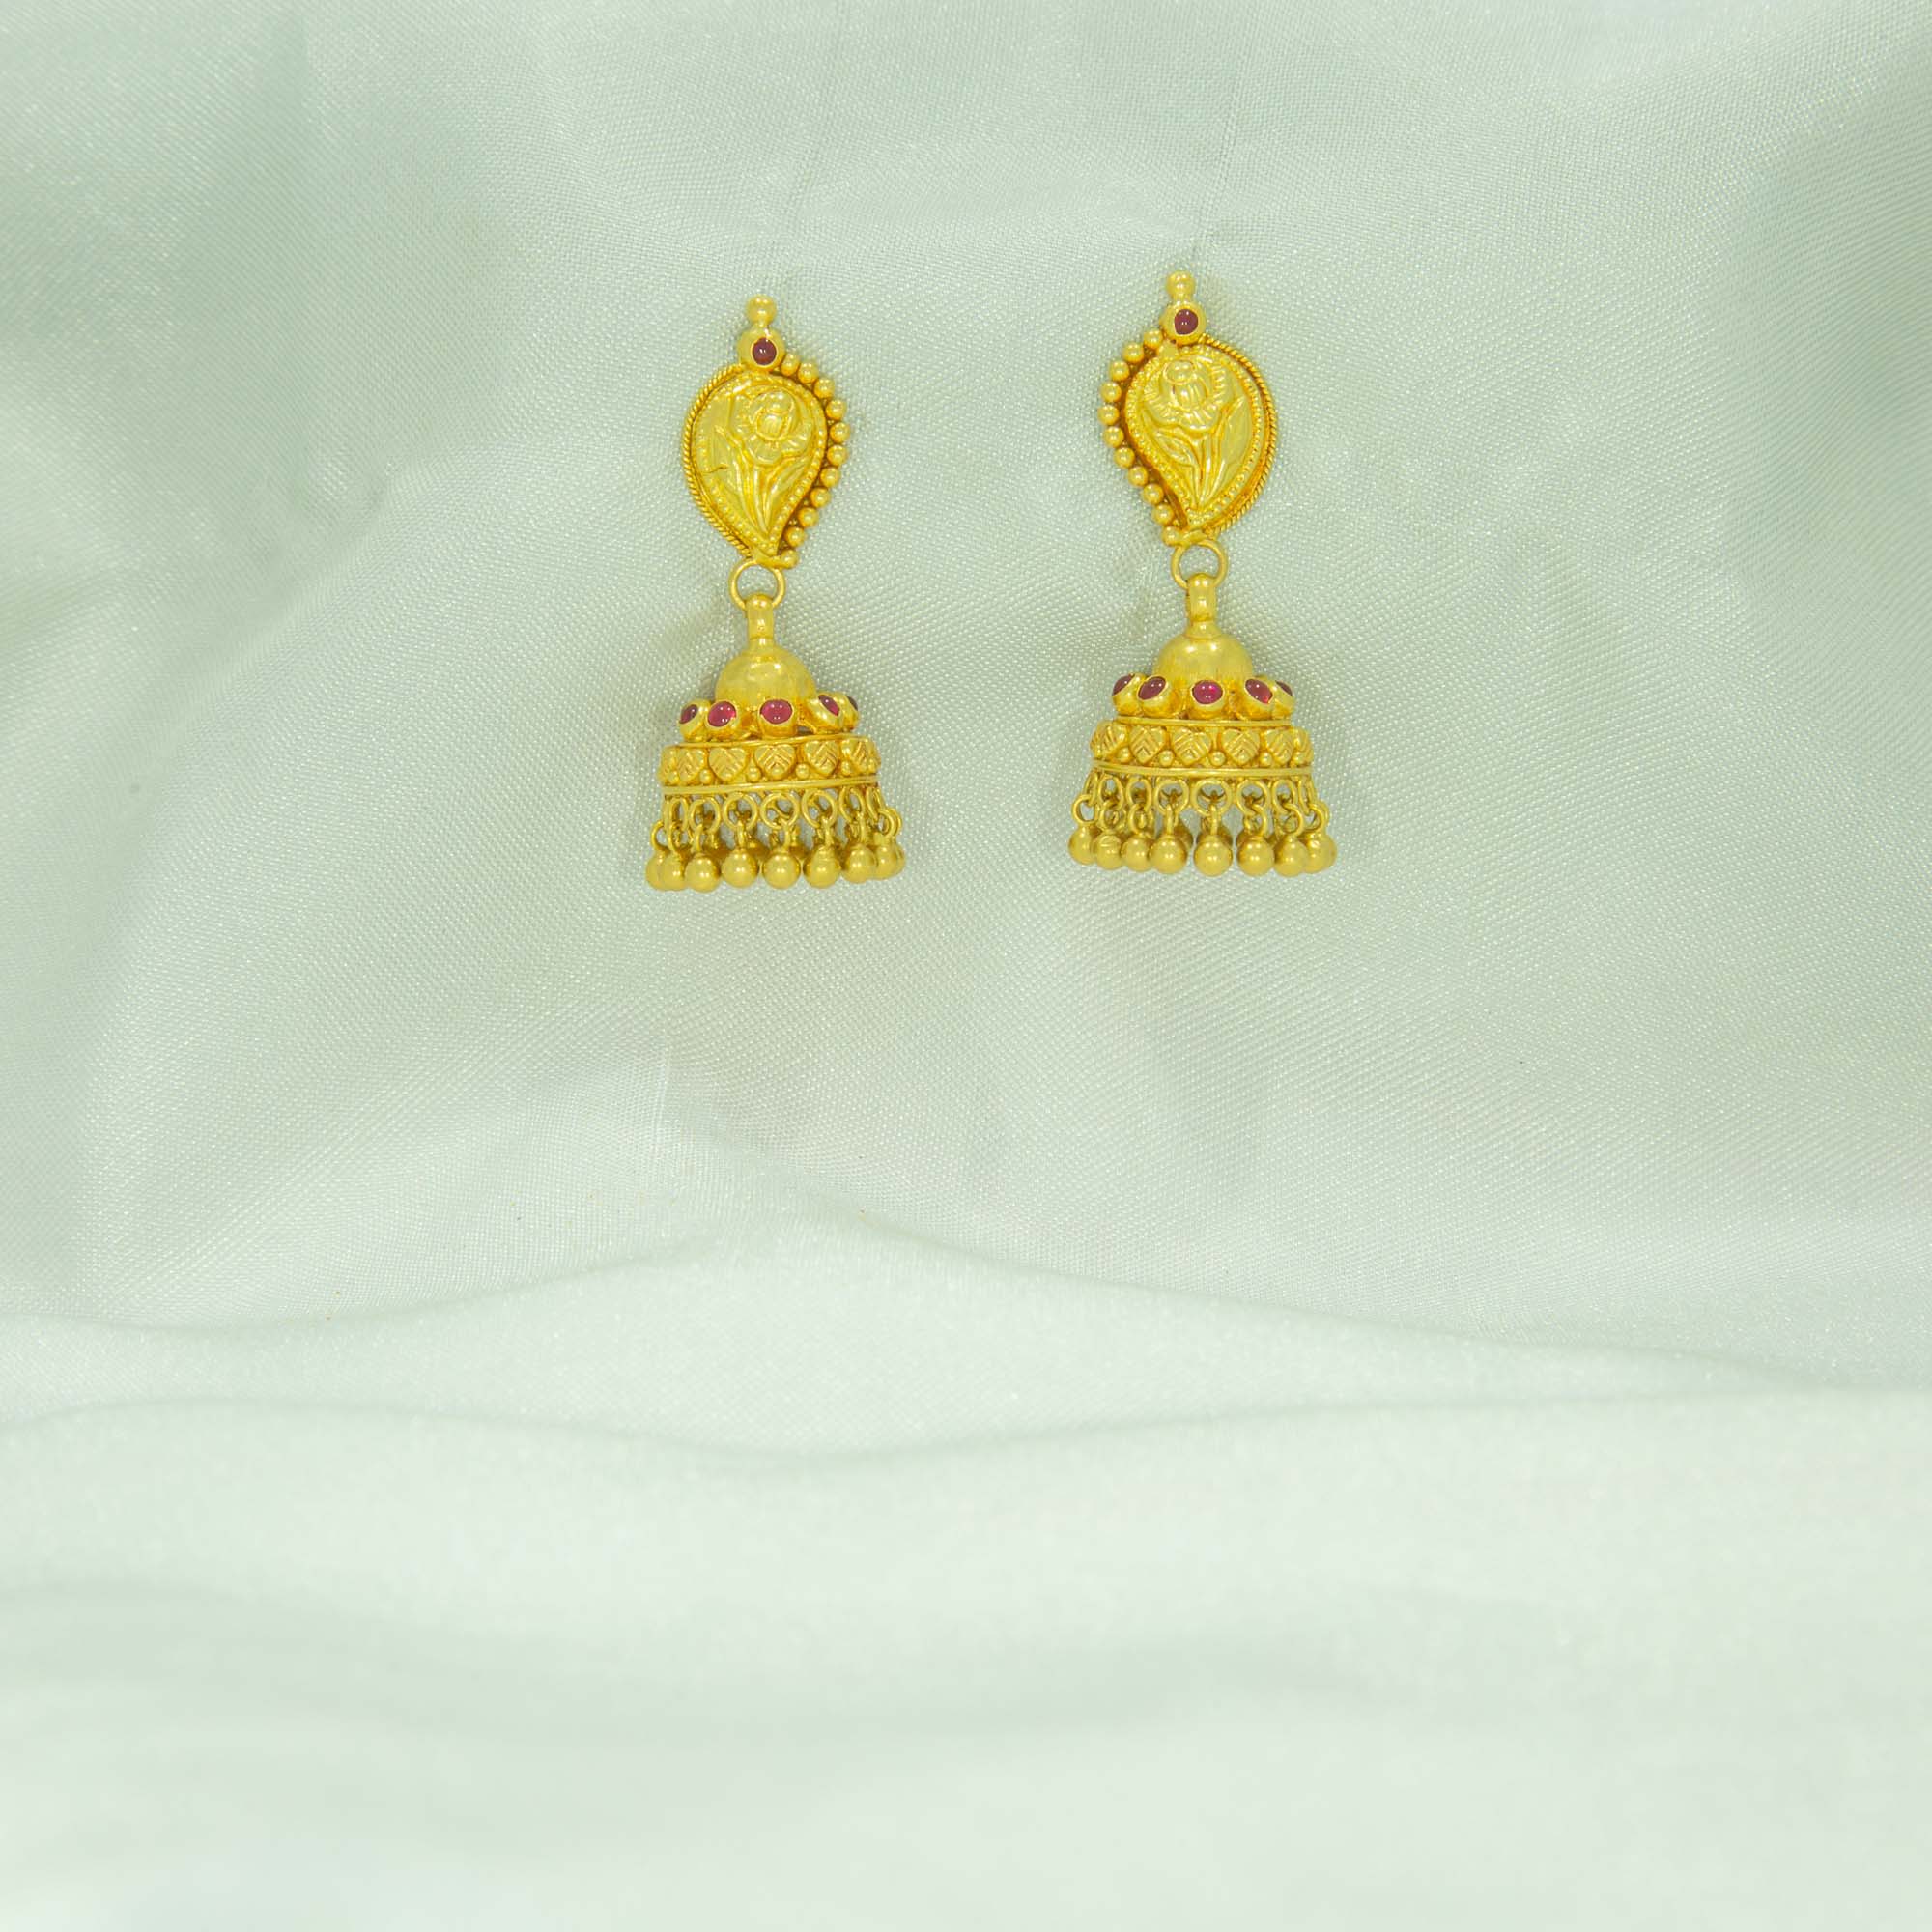 Light Weight Gold Earrings Designs with weight and price  Daily Wear Gold  Earrings  Shridhi Vlog  YouTube